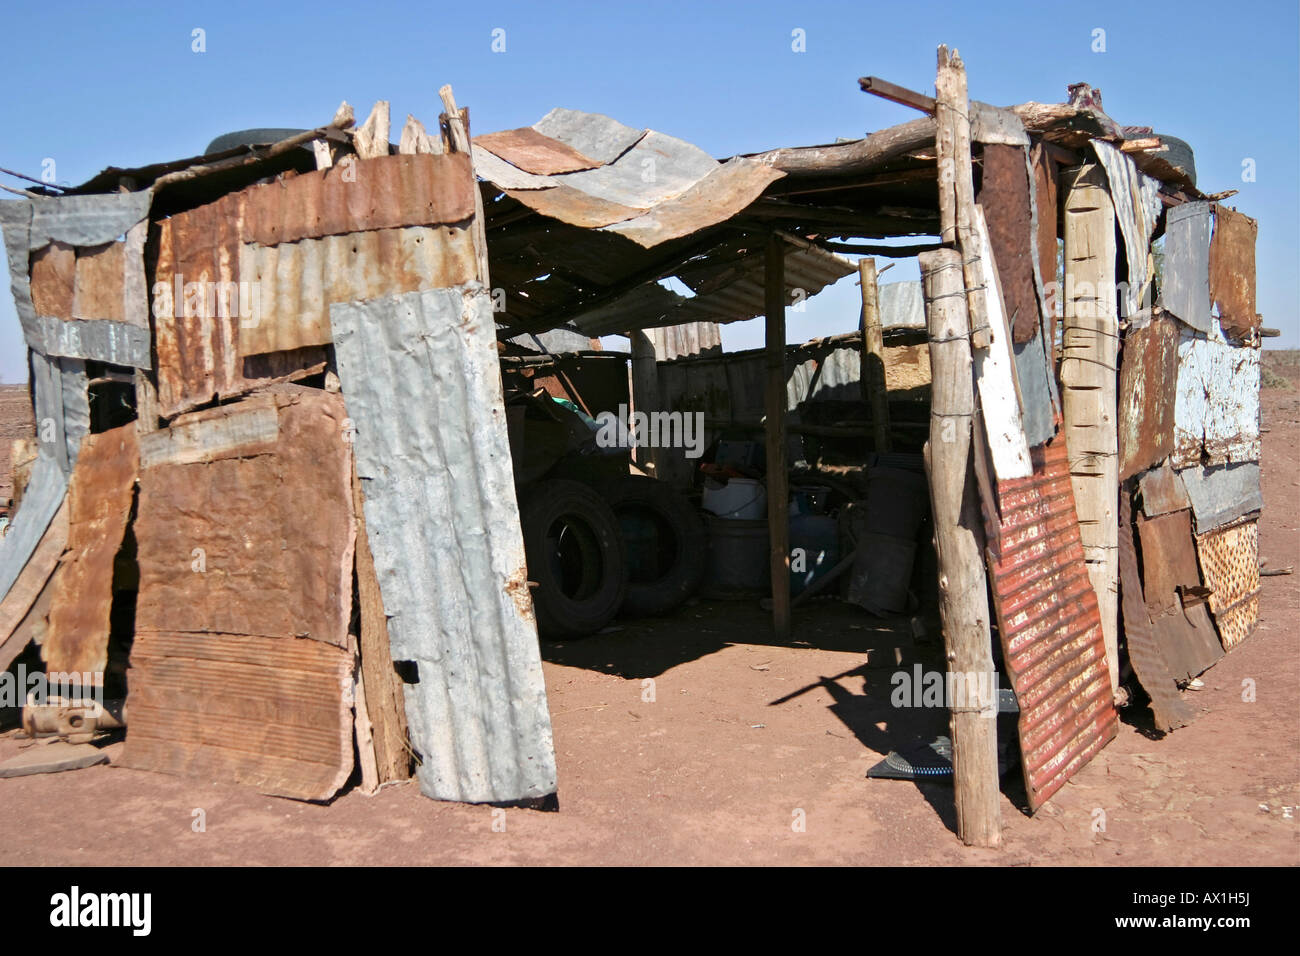 Small barrack consists of scrap metal, Namibia, Africa Stock Photo